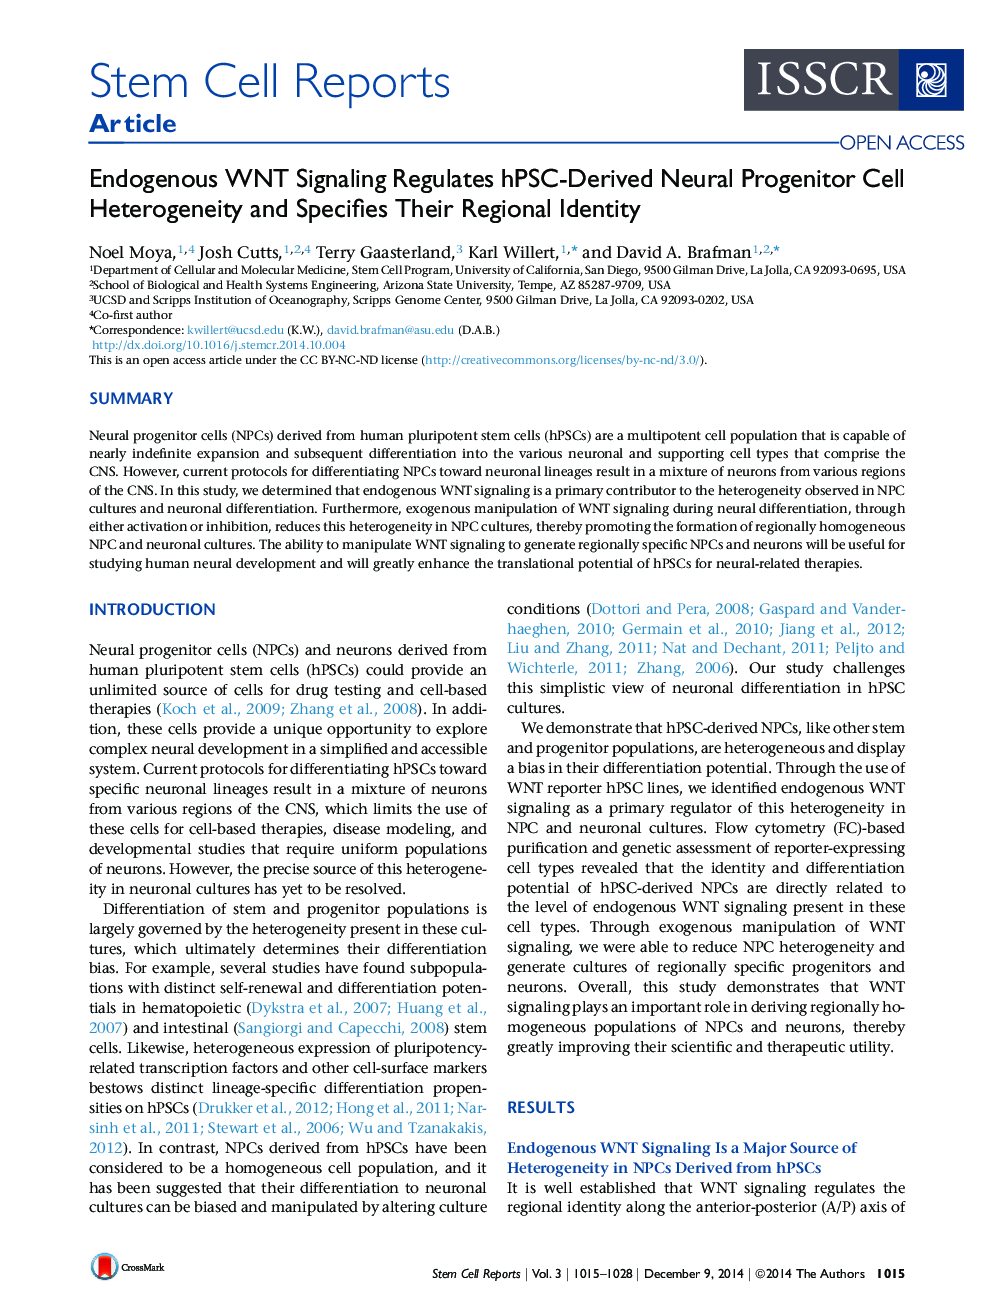 Endogenous WNT Signaling Regulates hPSC-Derived Neural Progenitor Cell Heterogeneity and Specifies Their Regional Identity 